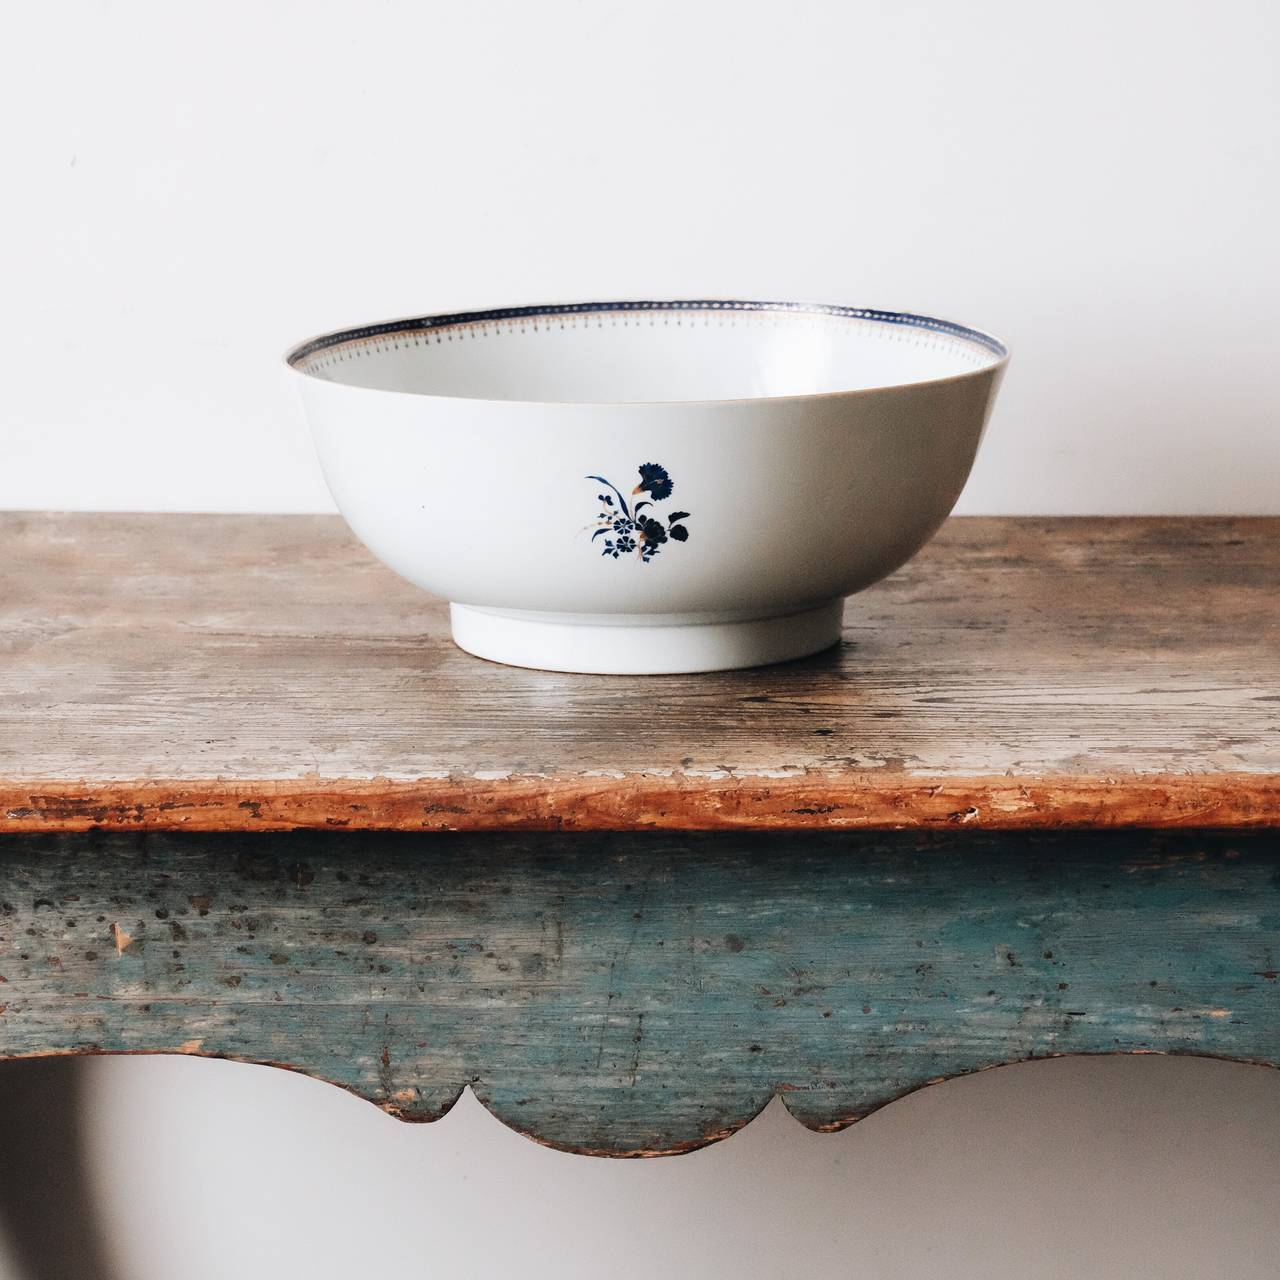 Large porcelain punch bowl. Simple and elegant in it's expression. Qianlong Chinese export for the Swedish market, circa 1790. 

History

Swedish East India Company was founded in 1731 by Niclas Sahlgren and Colin Campbell which became very